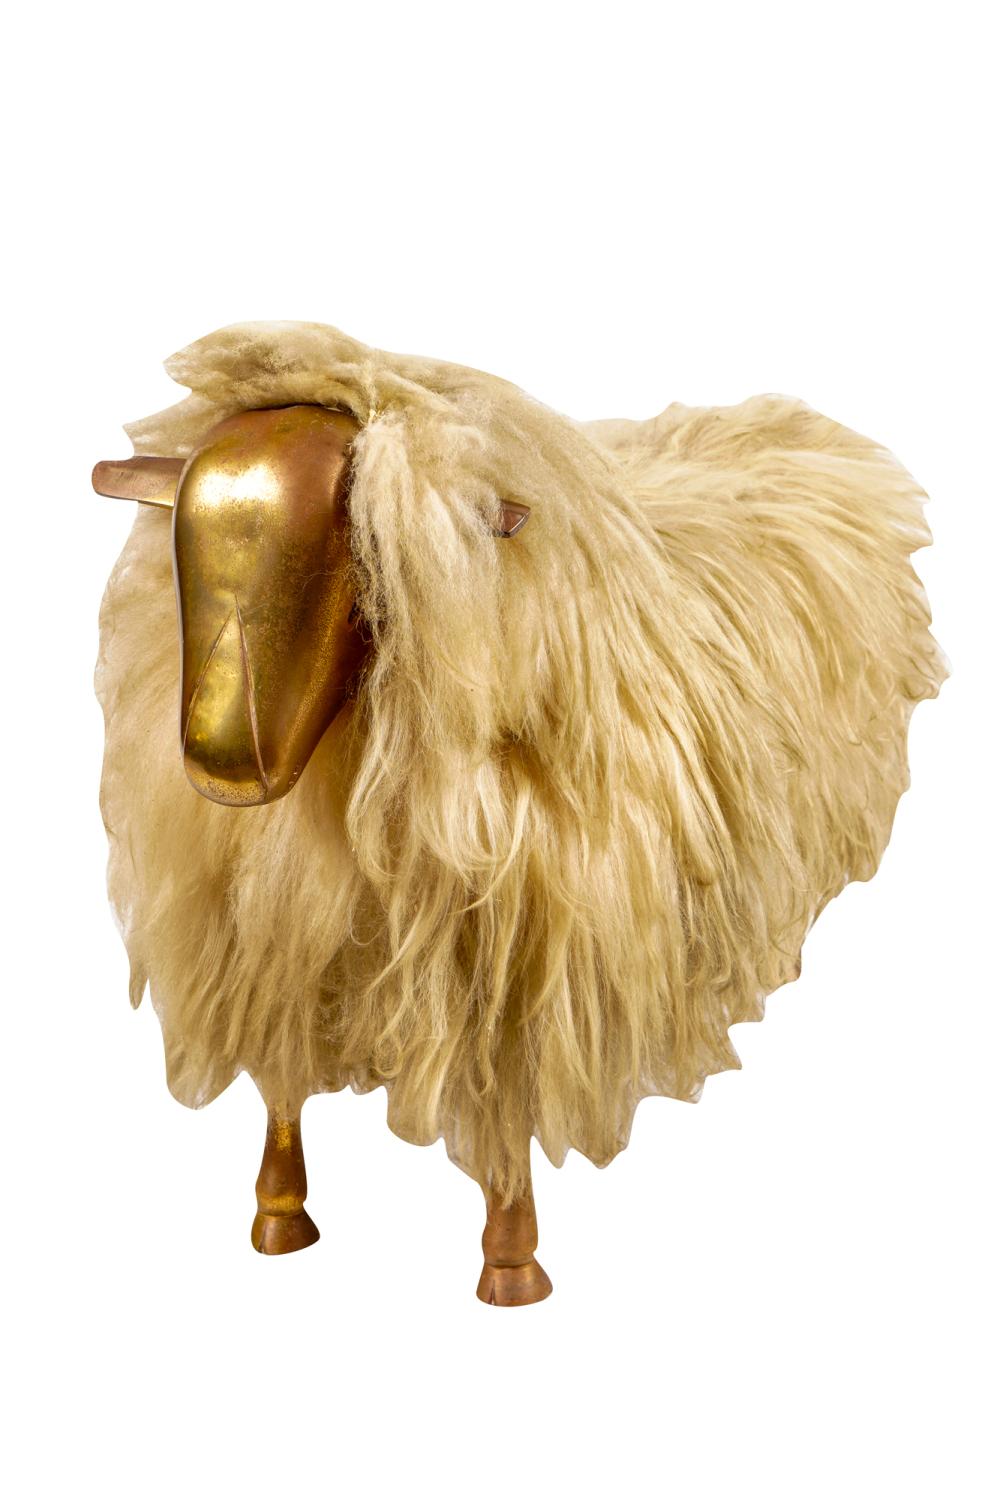 LALANNE STYLE SHEEPin the style